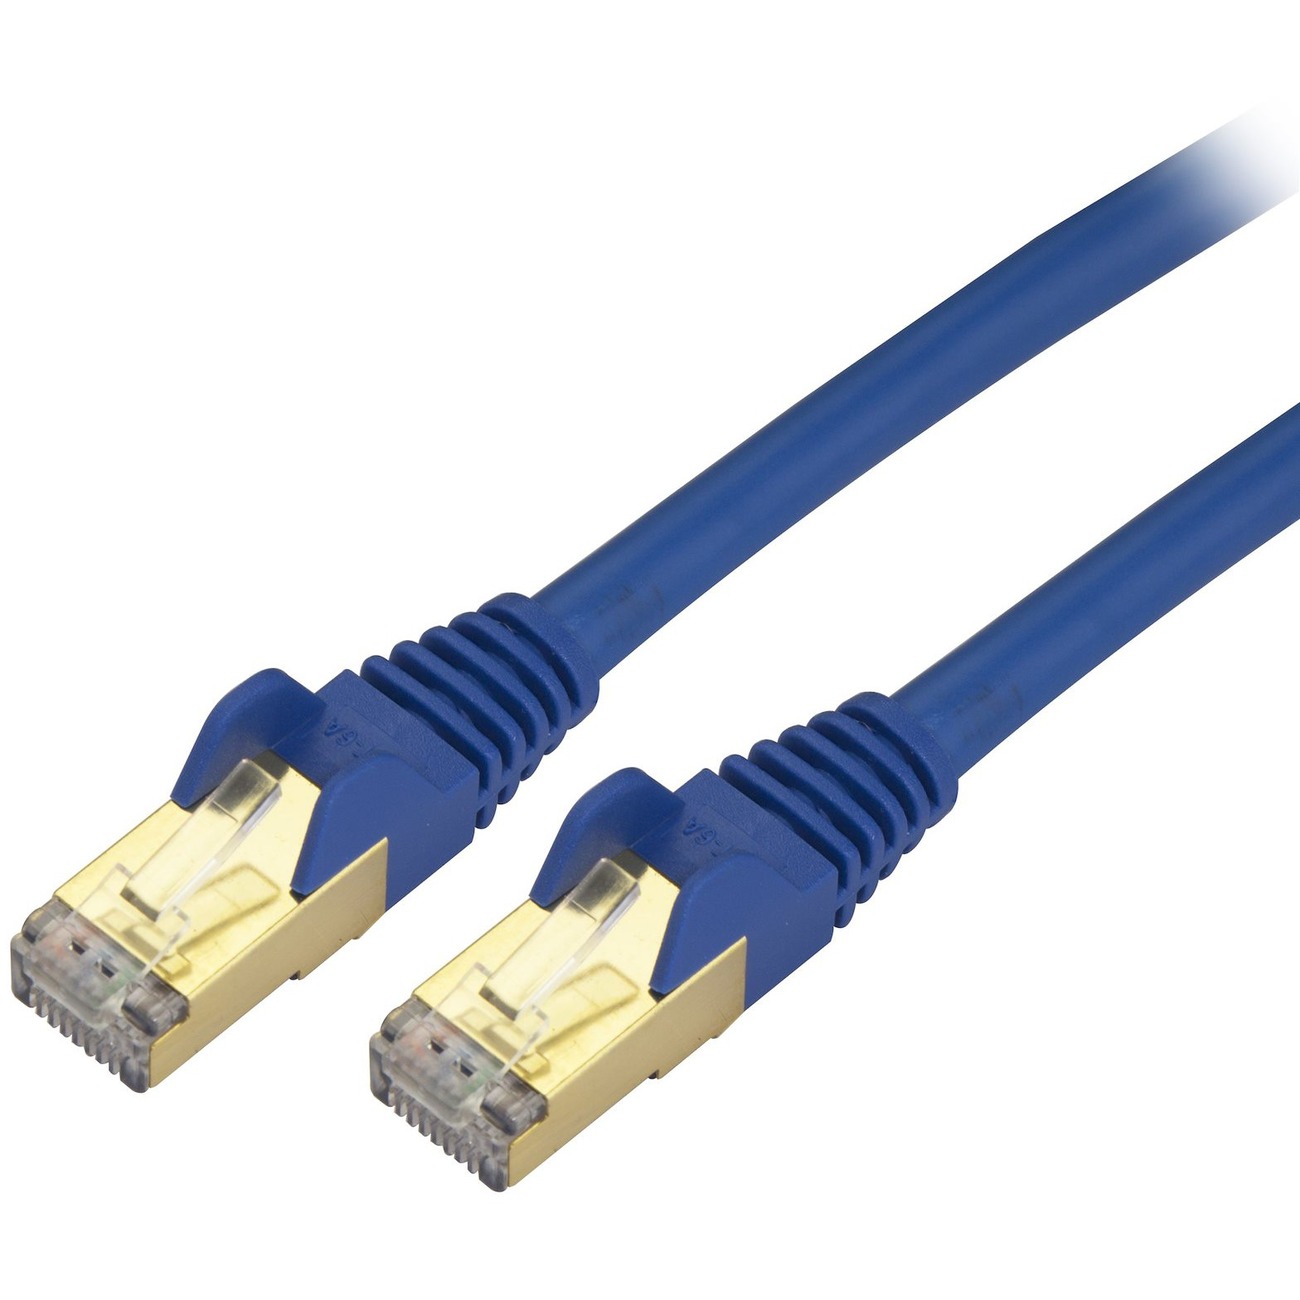 35ft CAT6a Ethernet Cable 10 Gigabit Category 6a Shielded  Snagless 100W PoE Patch Cord 10GbE Blue UL Certified Wiring/TIA CAT6a Ethernet  Cable delivers 10 Gigabit connection free of noise  EMI/RFI interference  Tested to ...